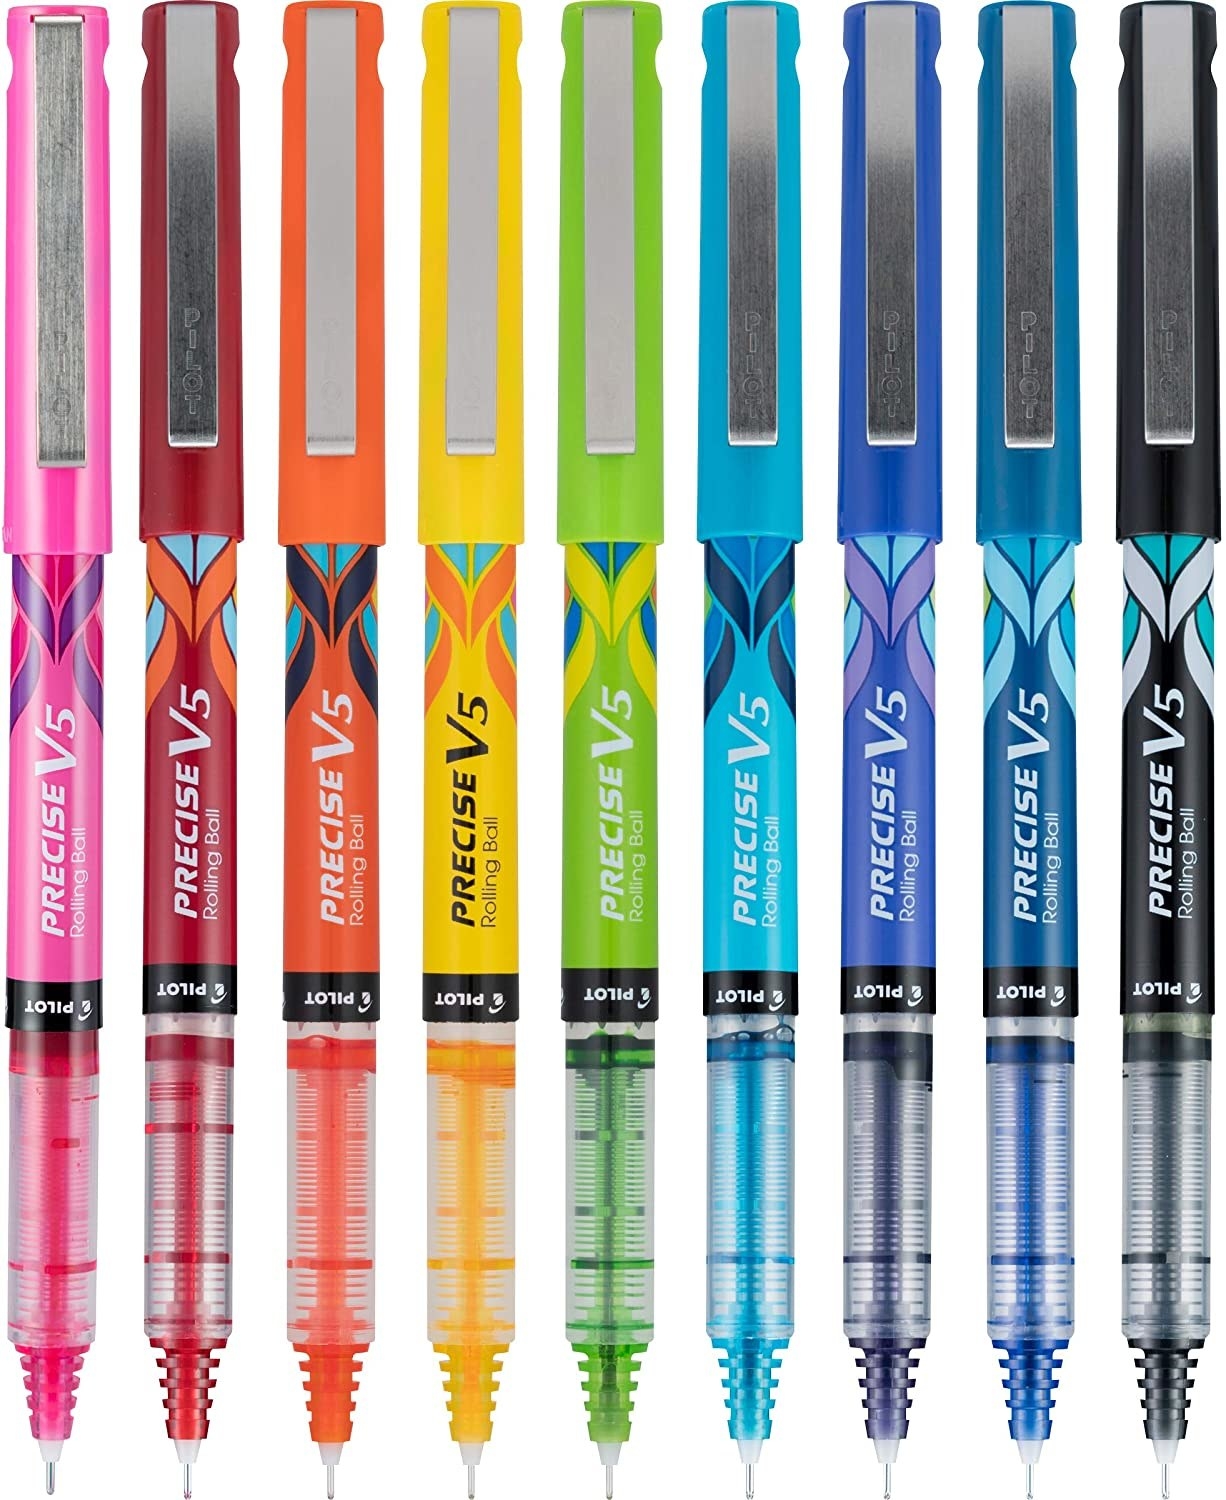 The pens in nine different colors